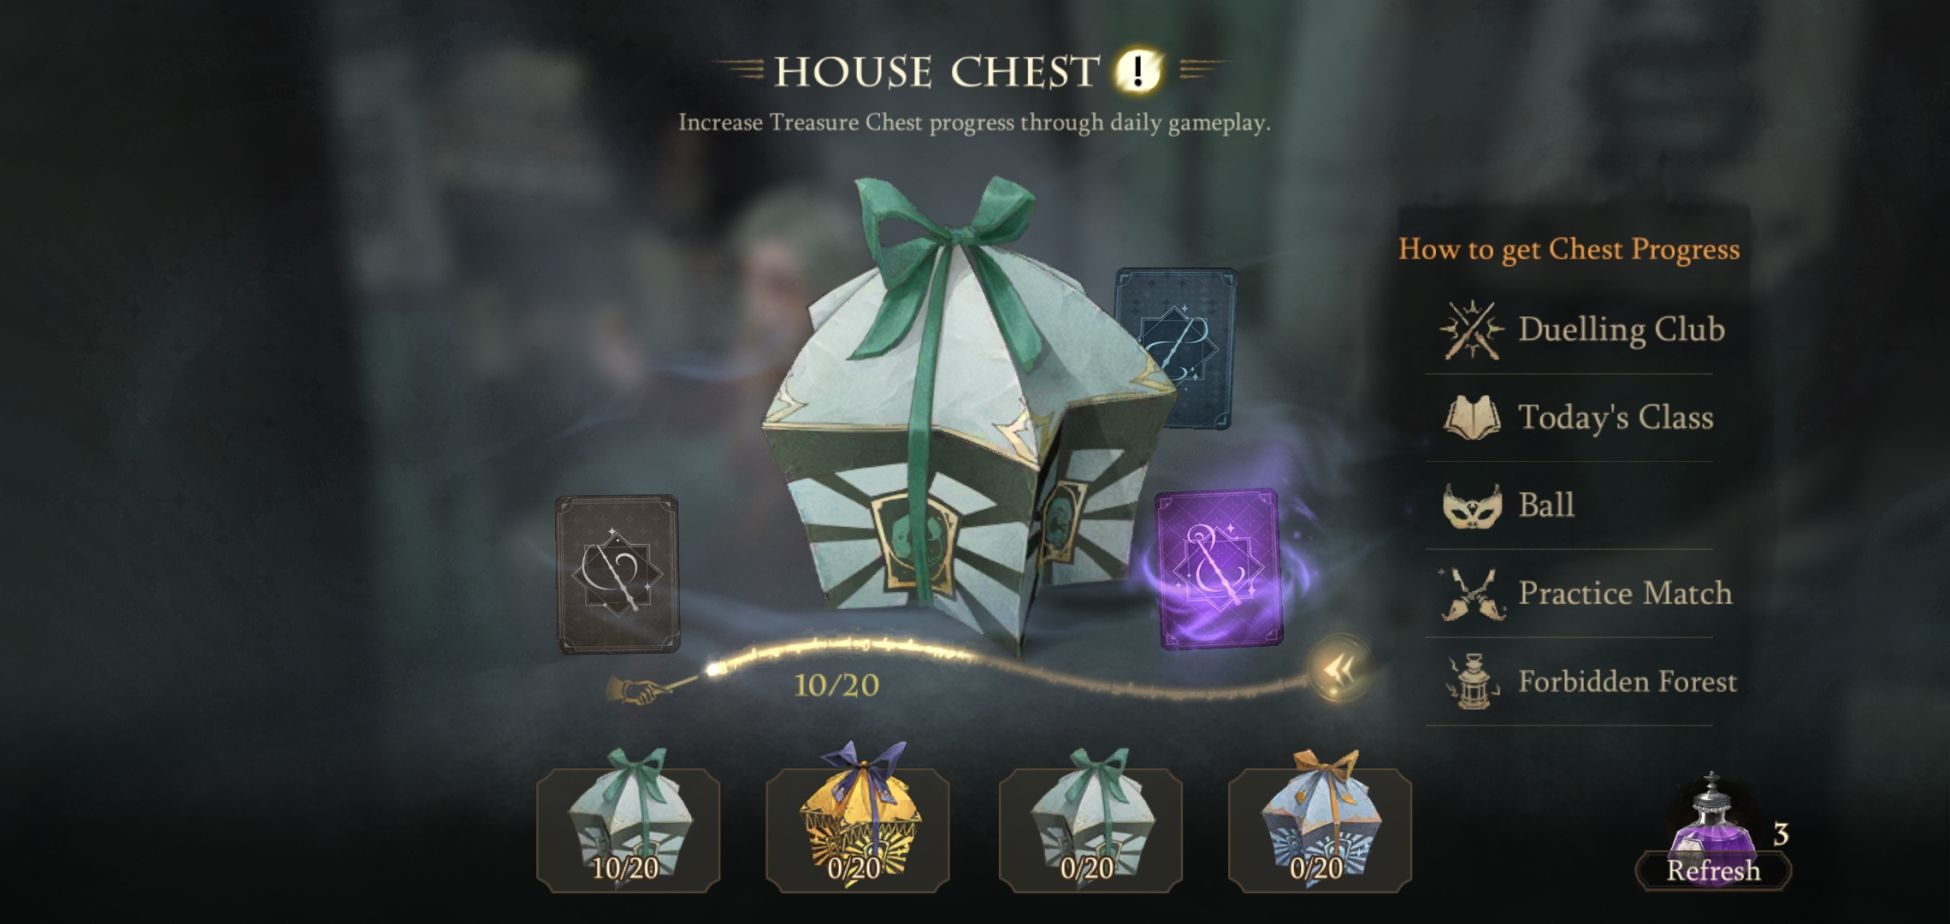 Open the chest of your home